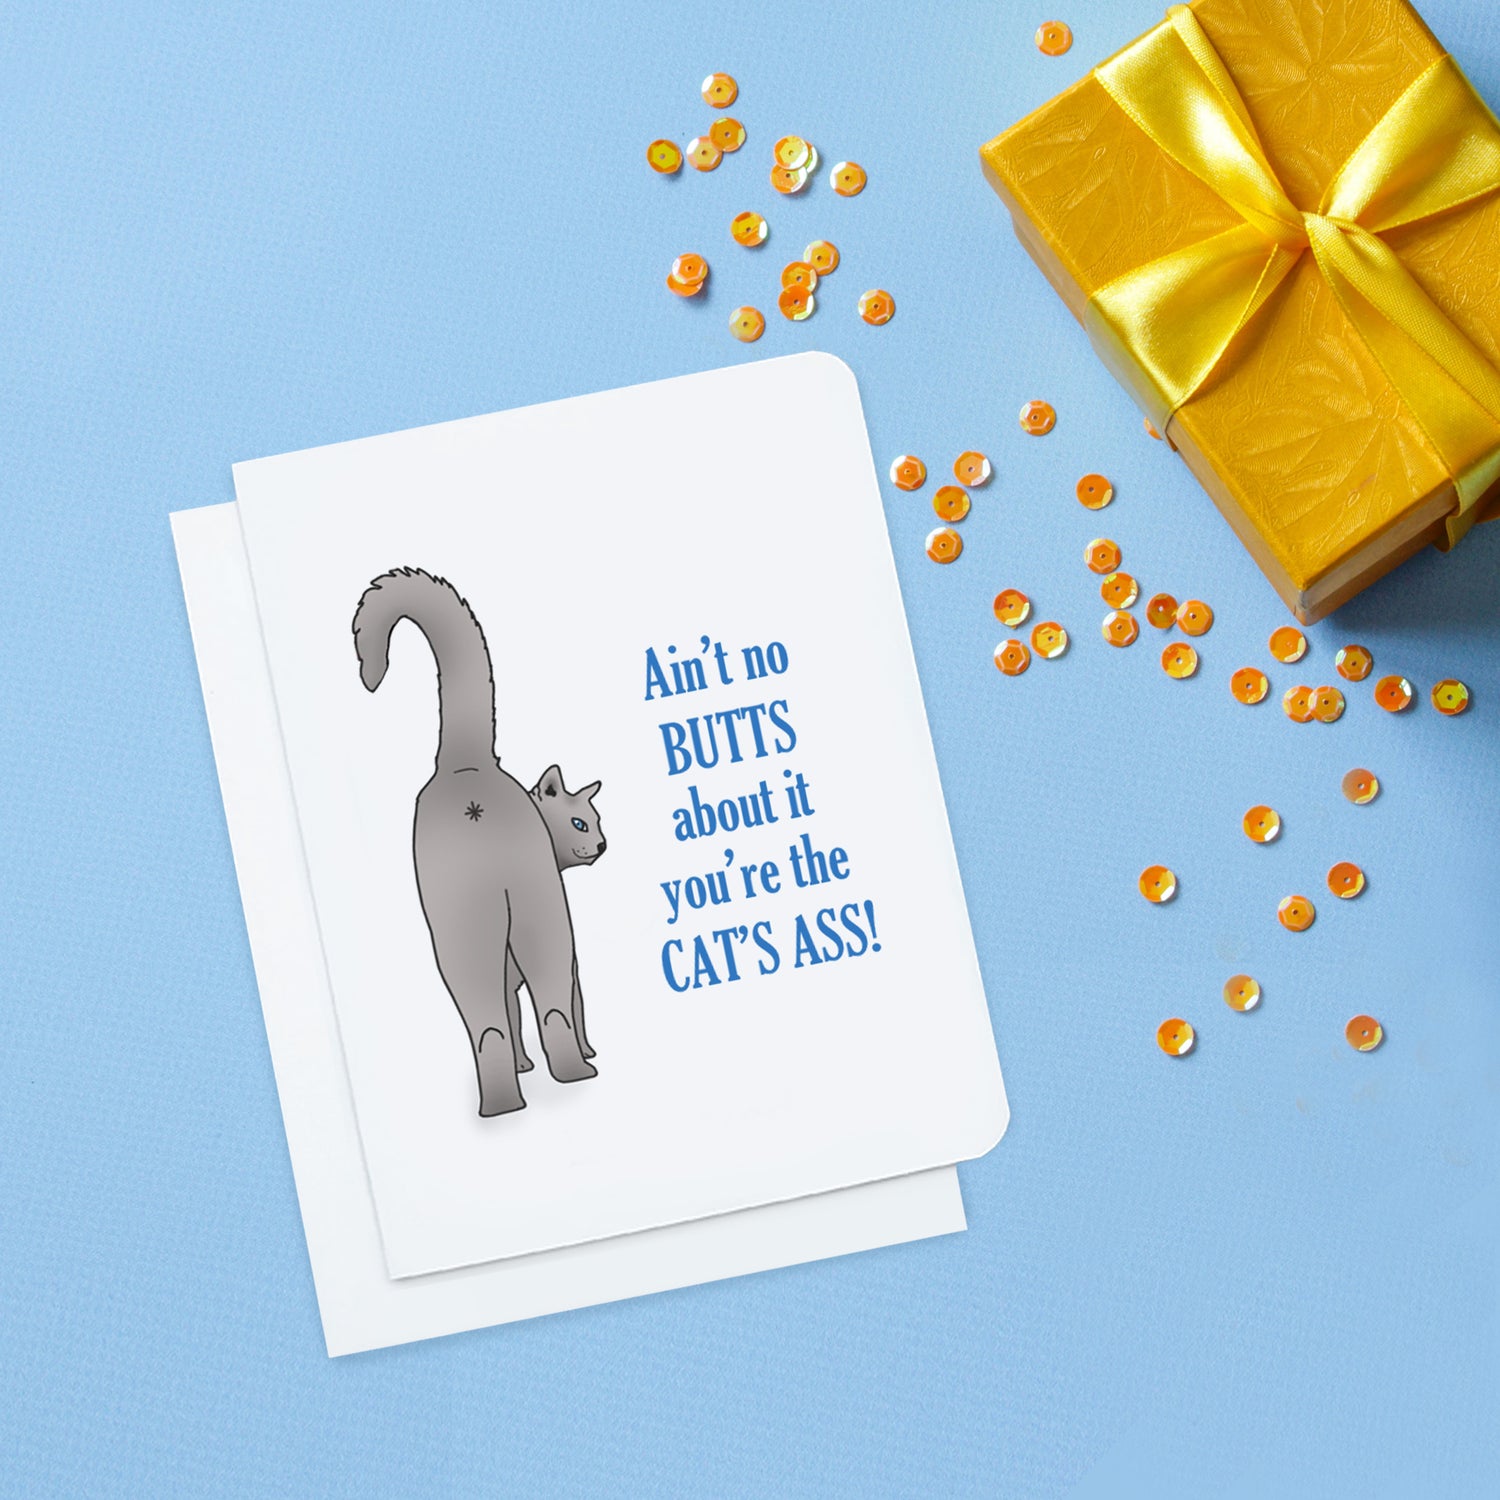 A photo of a white anniversary card. It has a grey cat showing its butt. Text on card reads, 'Ain't no butts about it you're the cat's ass!'